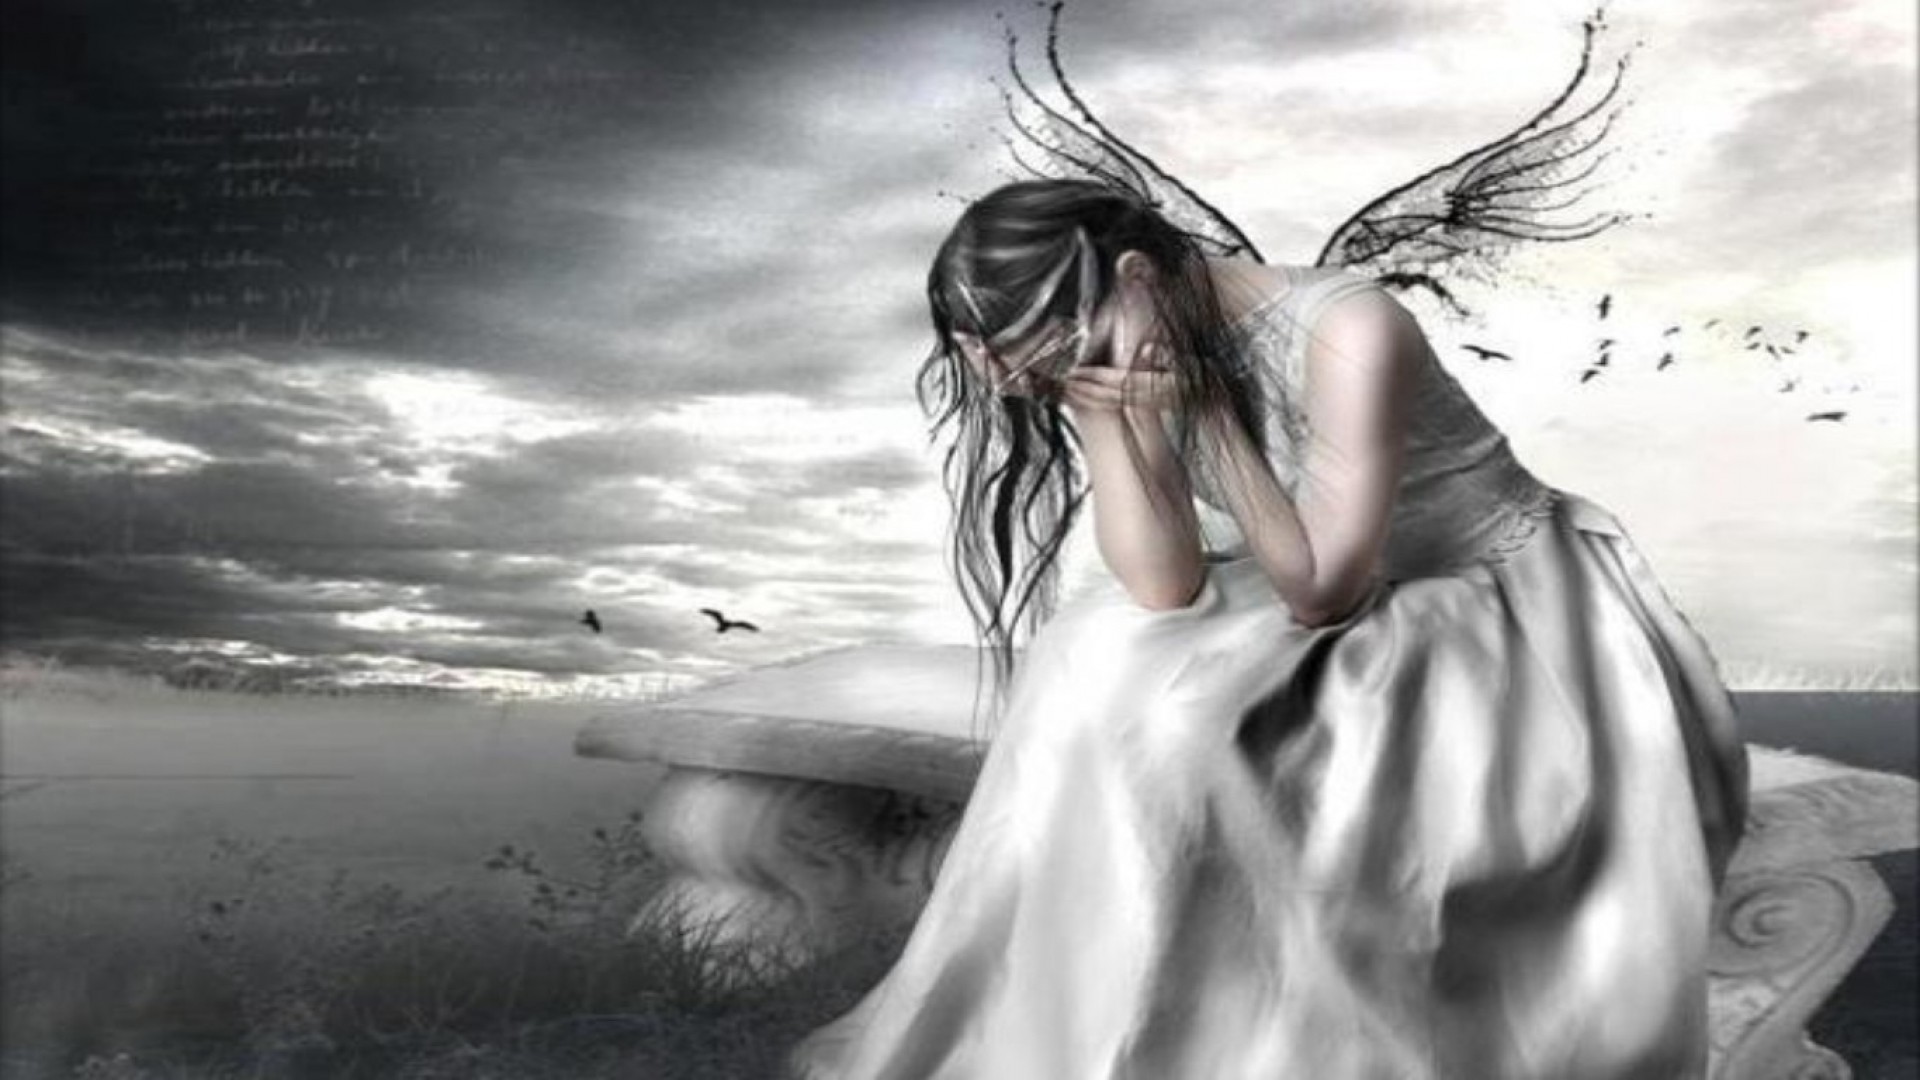 1920x1080 Crying Fairy Wallpaper - MixHD wallpapers